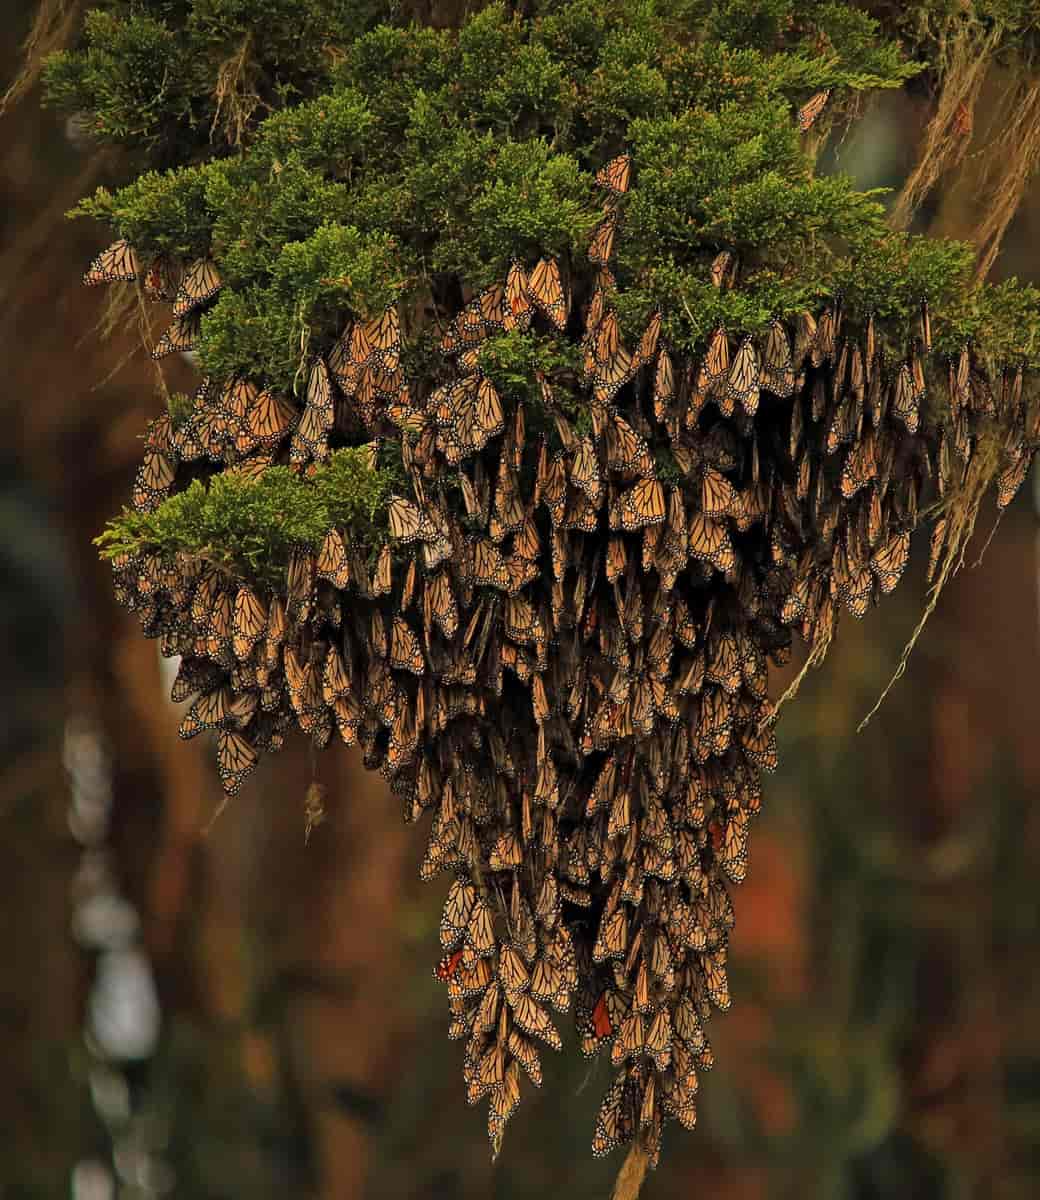 A group of monarch butterflies resting on a conifer